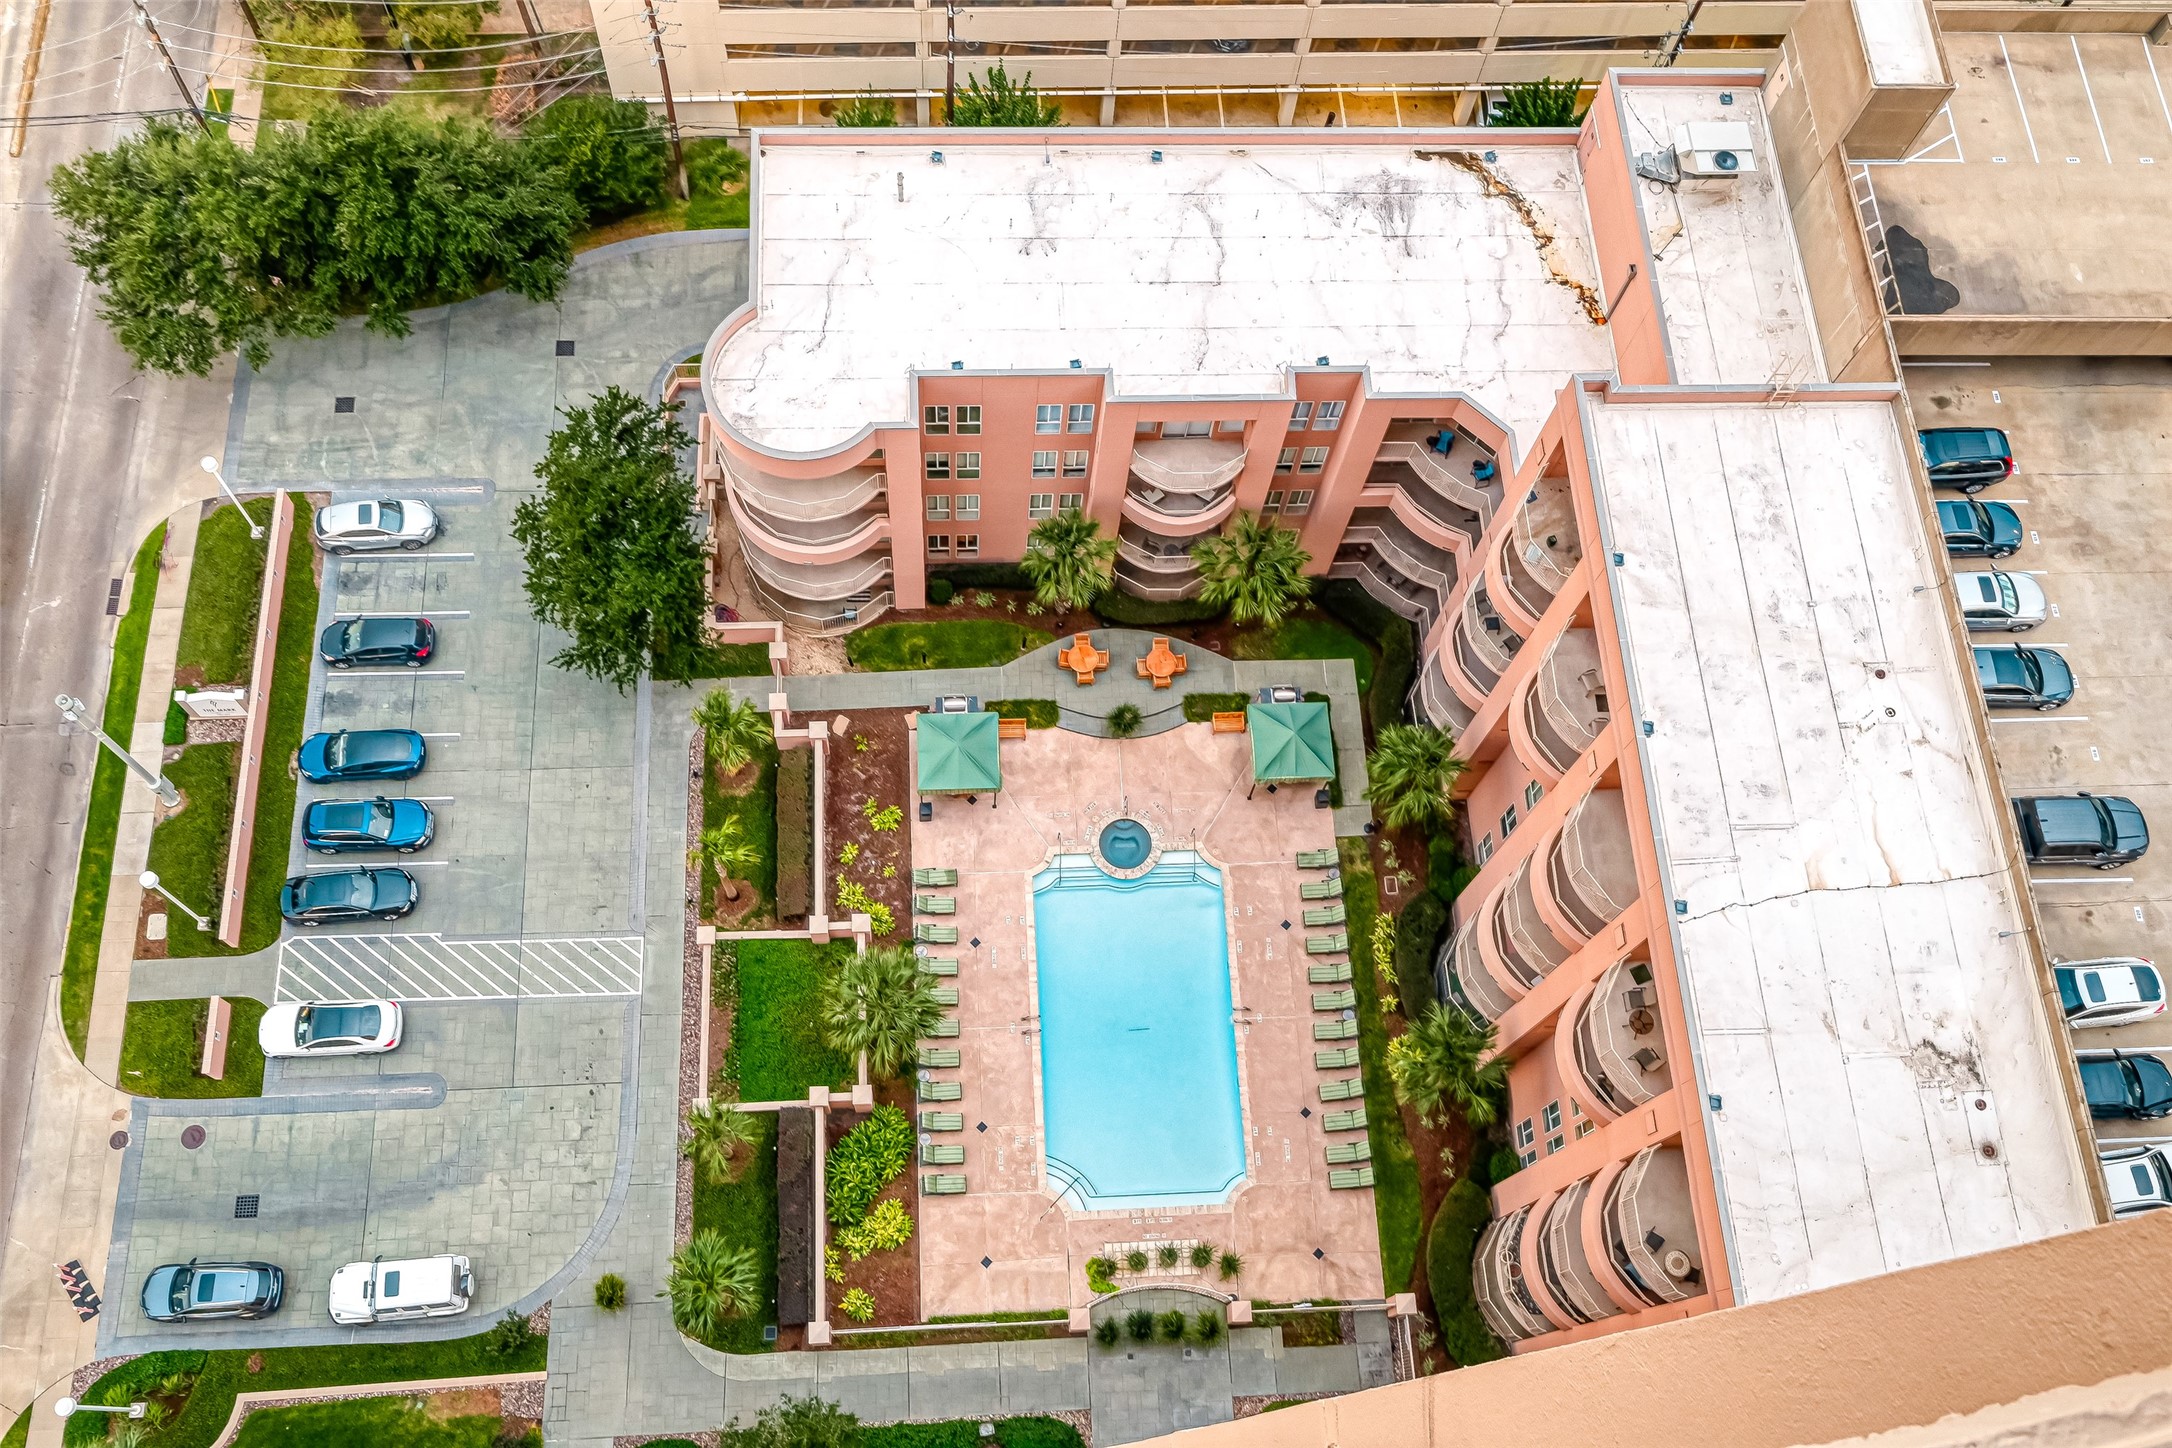 Overhead view of the condo tower and the pool area.